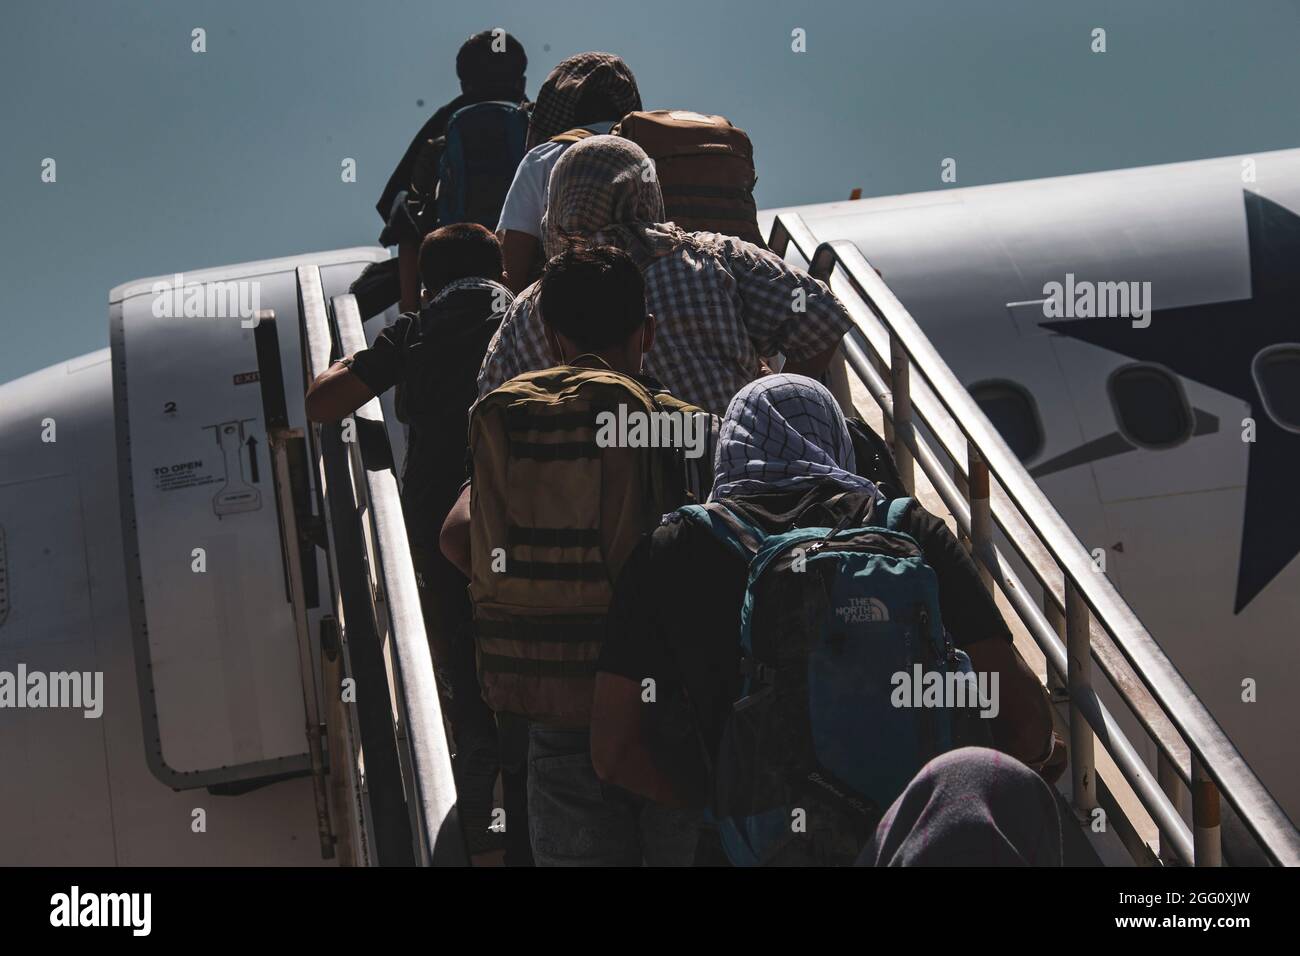 Evacuees board an aircraft for evacuation at Hamid Karzai International Airport, Afghanistan, Aug. 25. U.S. service members are assisting the Department of State with a Non-combatant Evacuation Operation (NEO) in Afghanistan. (U.S. Marine Corps photo by Cpl. Davis Harris) Stock Photo